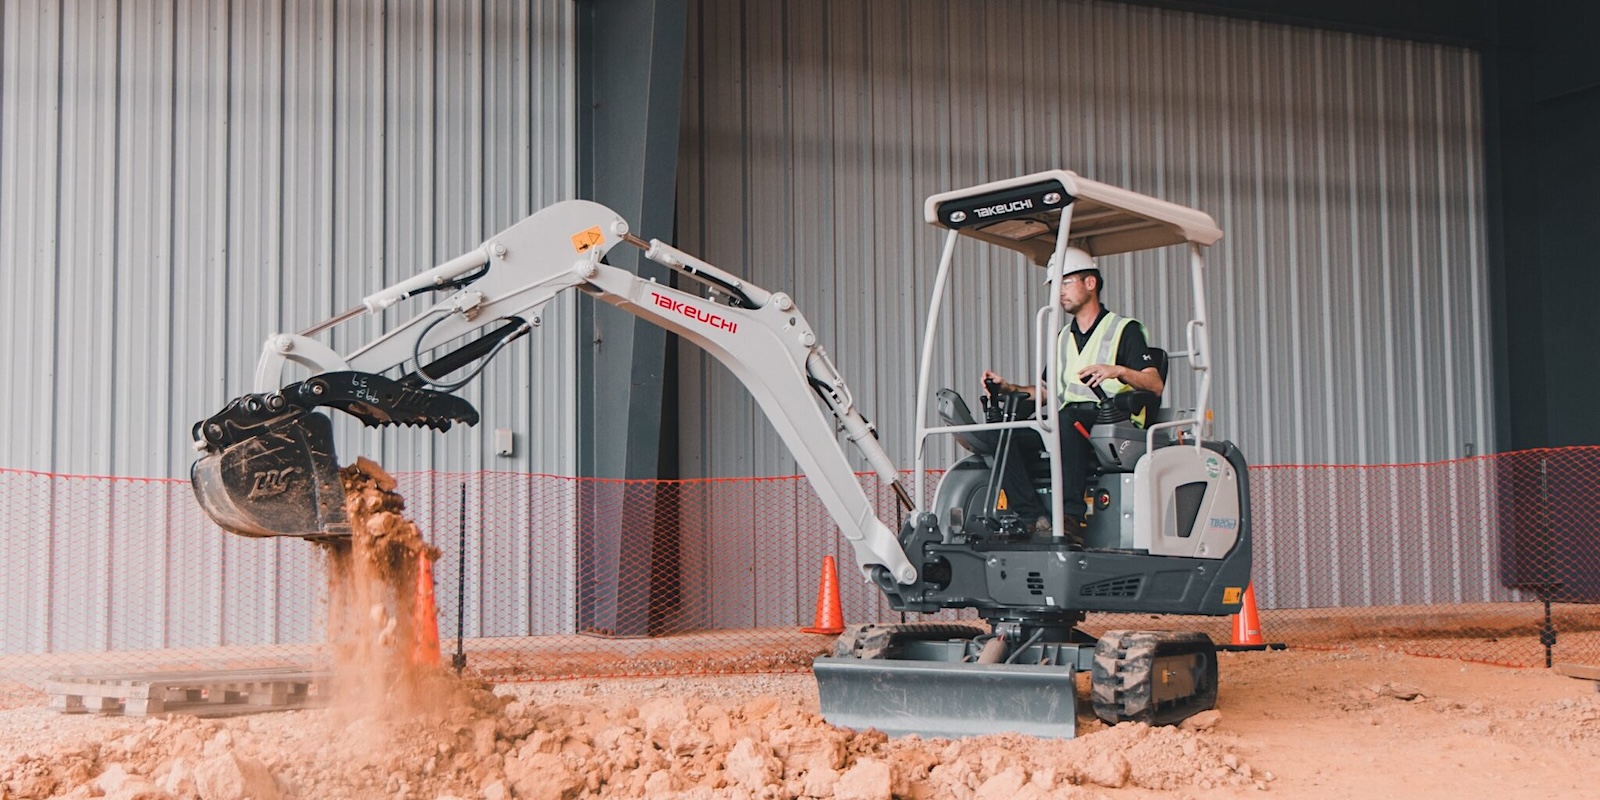 Semco releases first battery-powered compact excavator